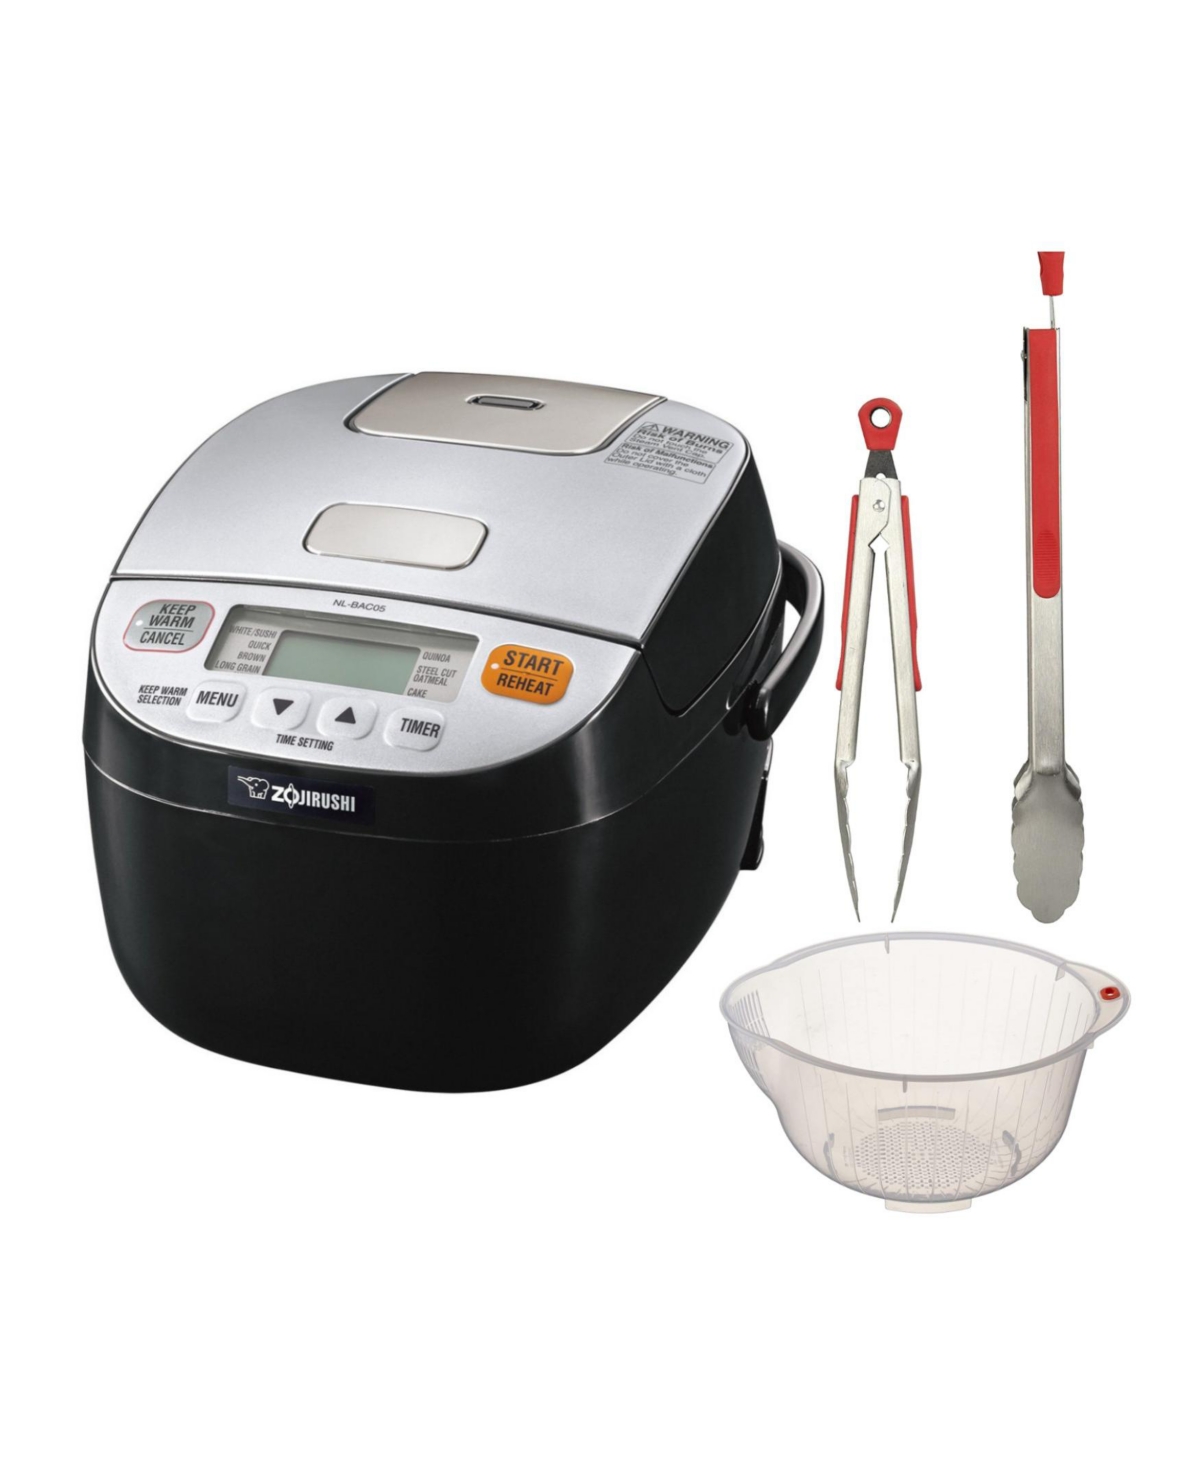 Micom Rice Cooker and Warmer (3-Cup/ Silver Black) Bundle - Black